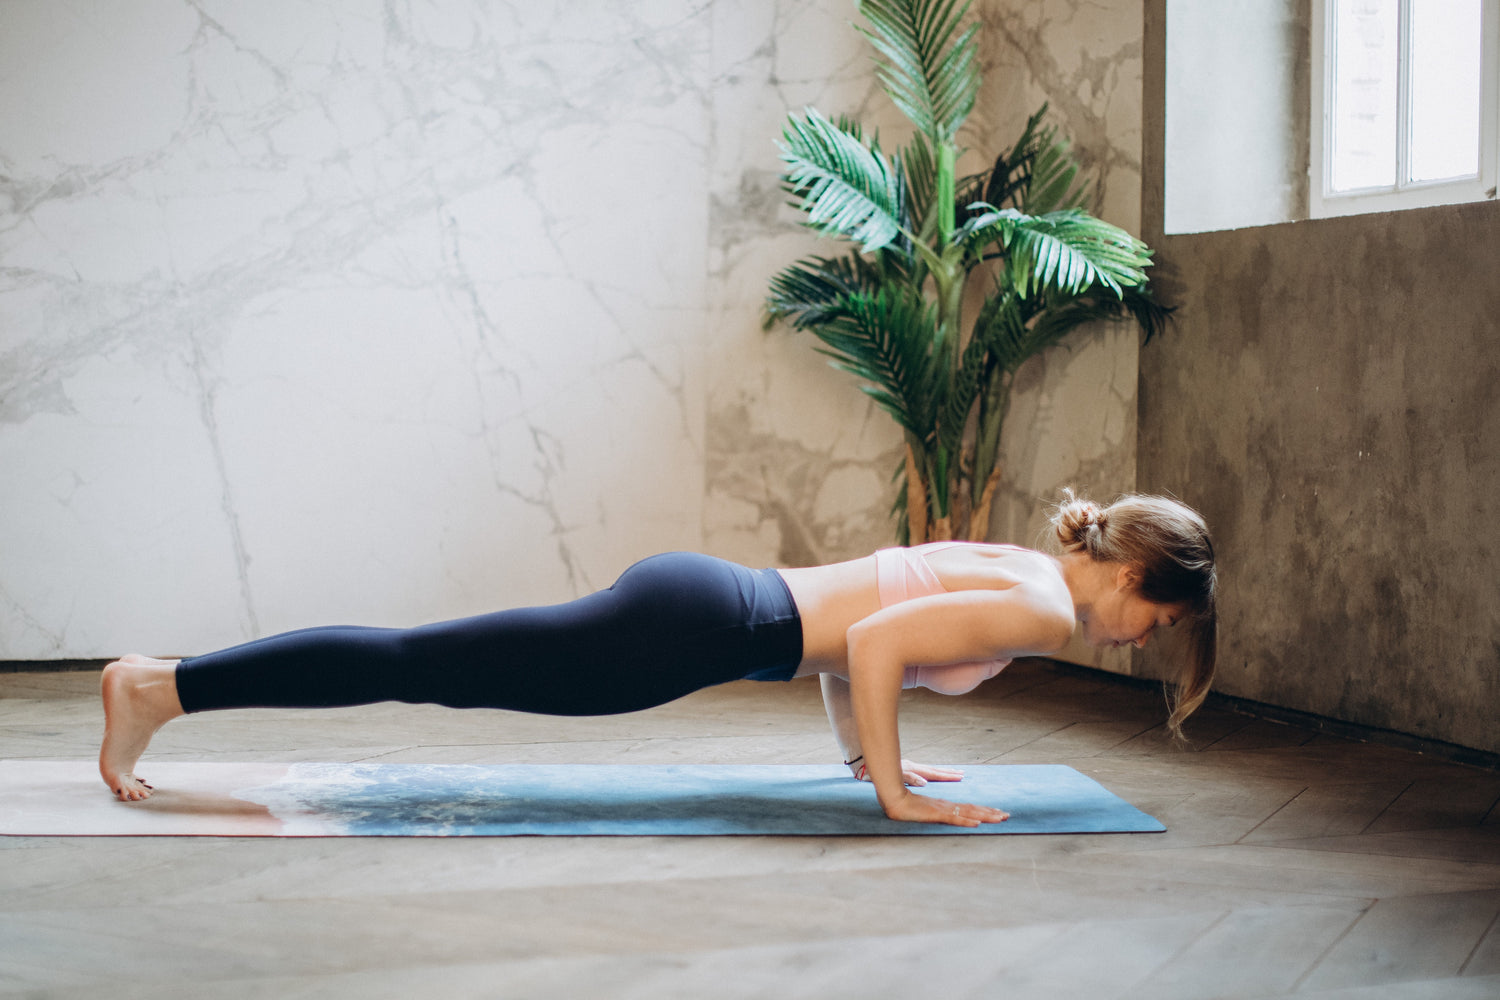 girl in chaturanga yoga pose on yoga mat in neutral room with palm plant in corner